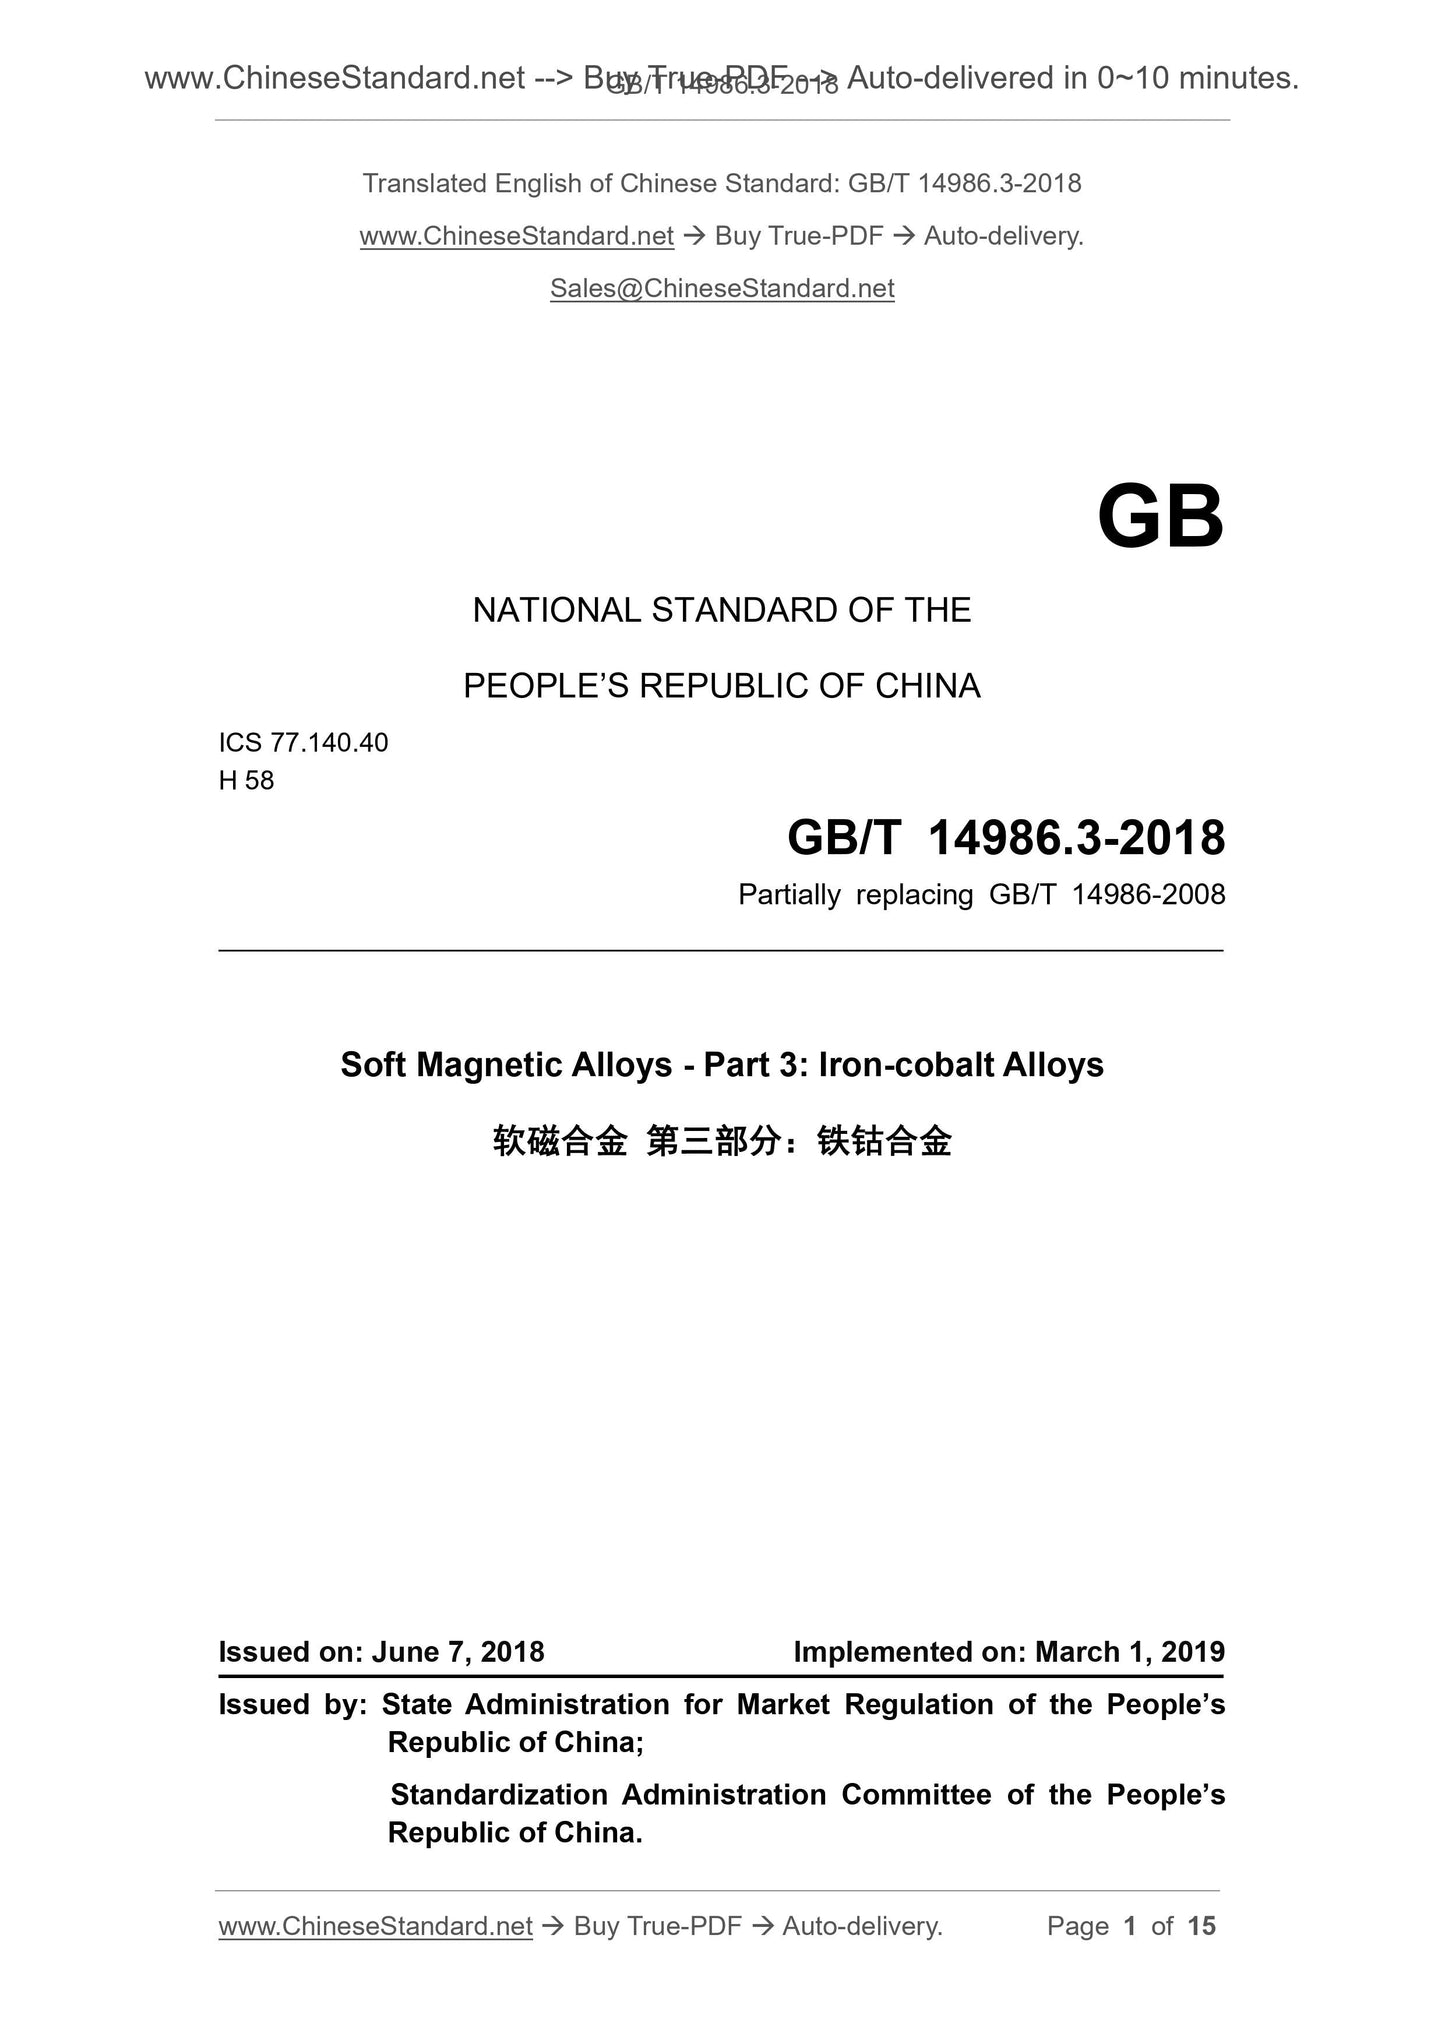 GB/T 14986.3-2018 Page 1